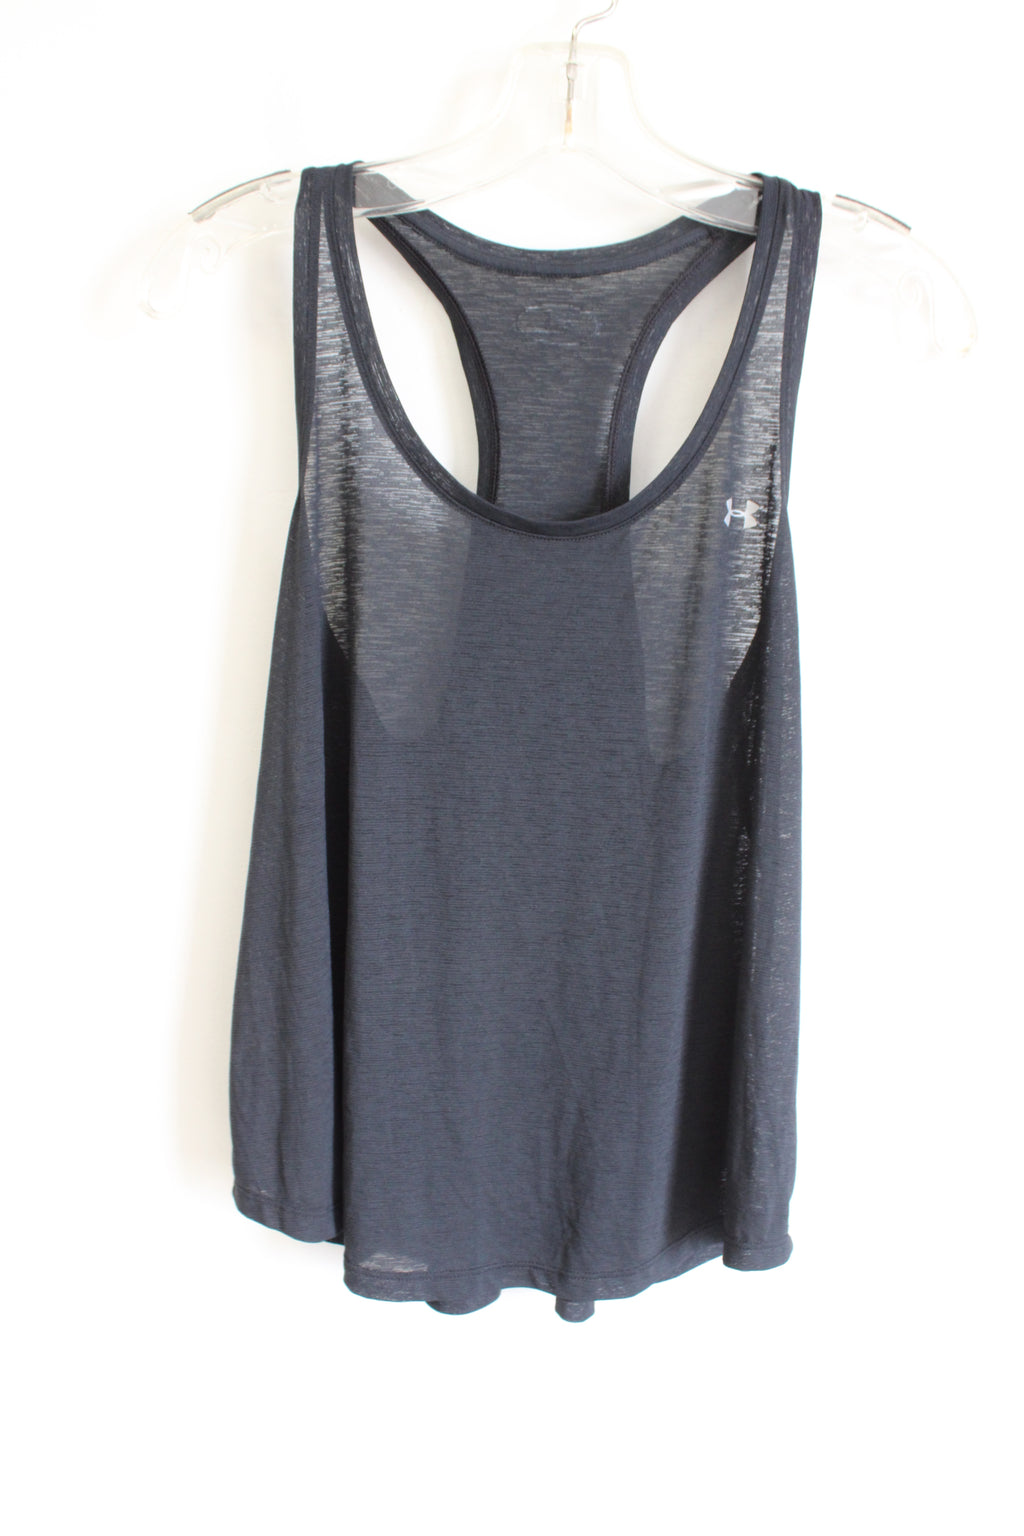 Under Armour Loose Black Athletic Tank | S